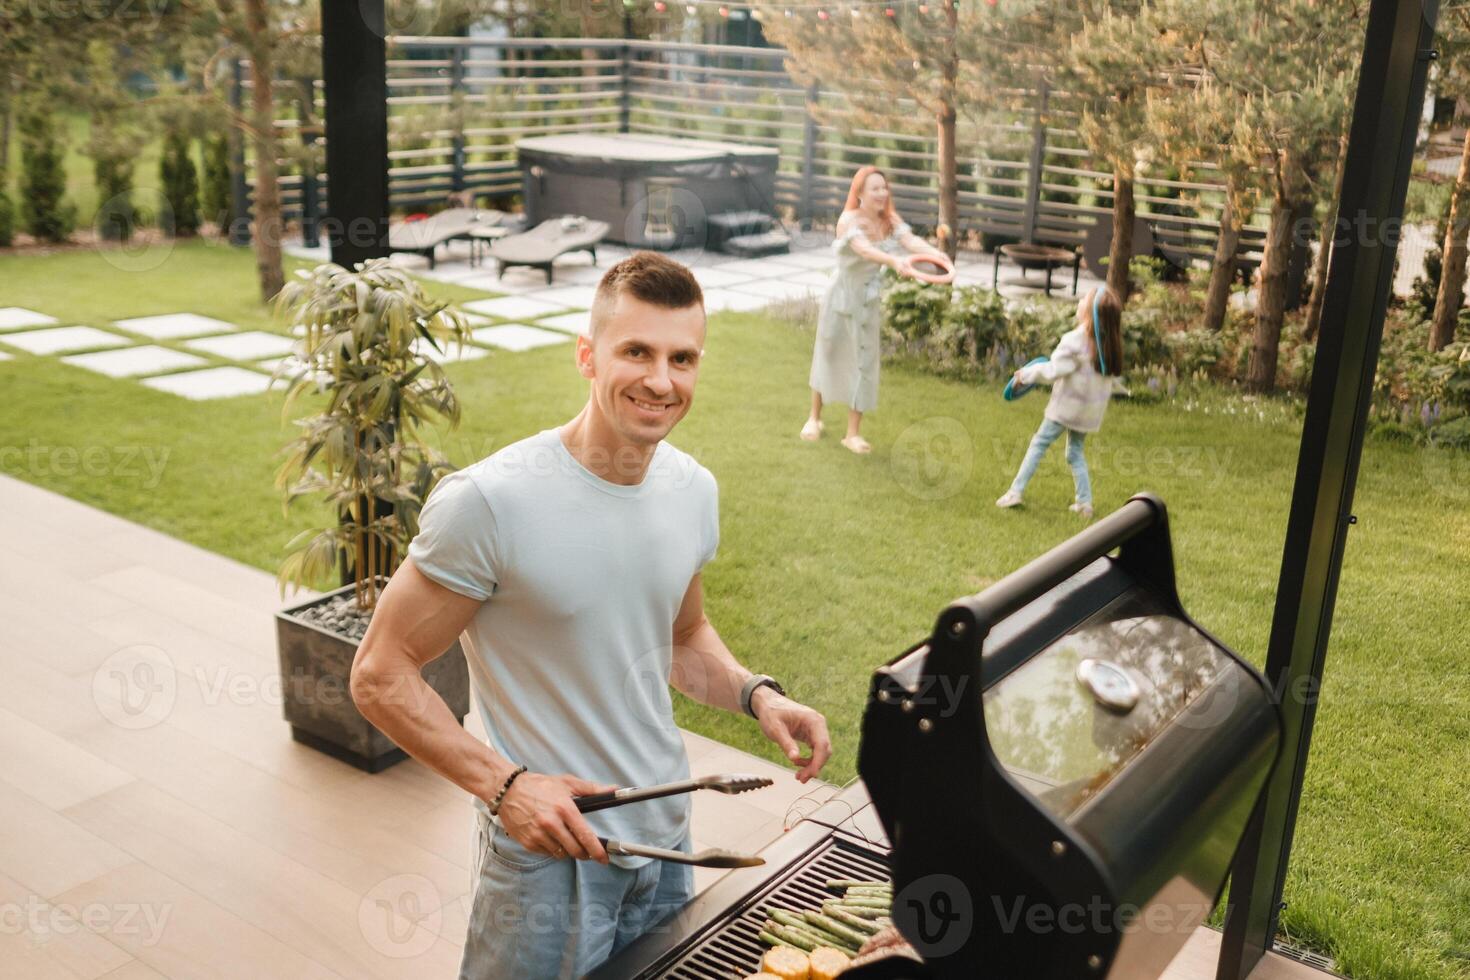 A man on the street is cooking a steak on the grill at a barbecue photo